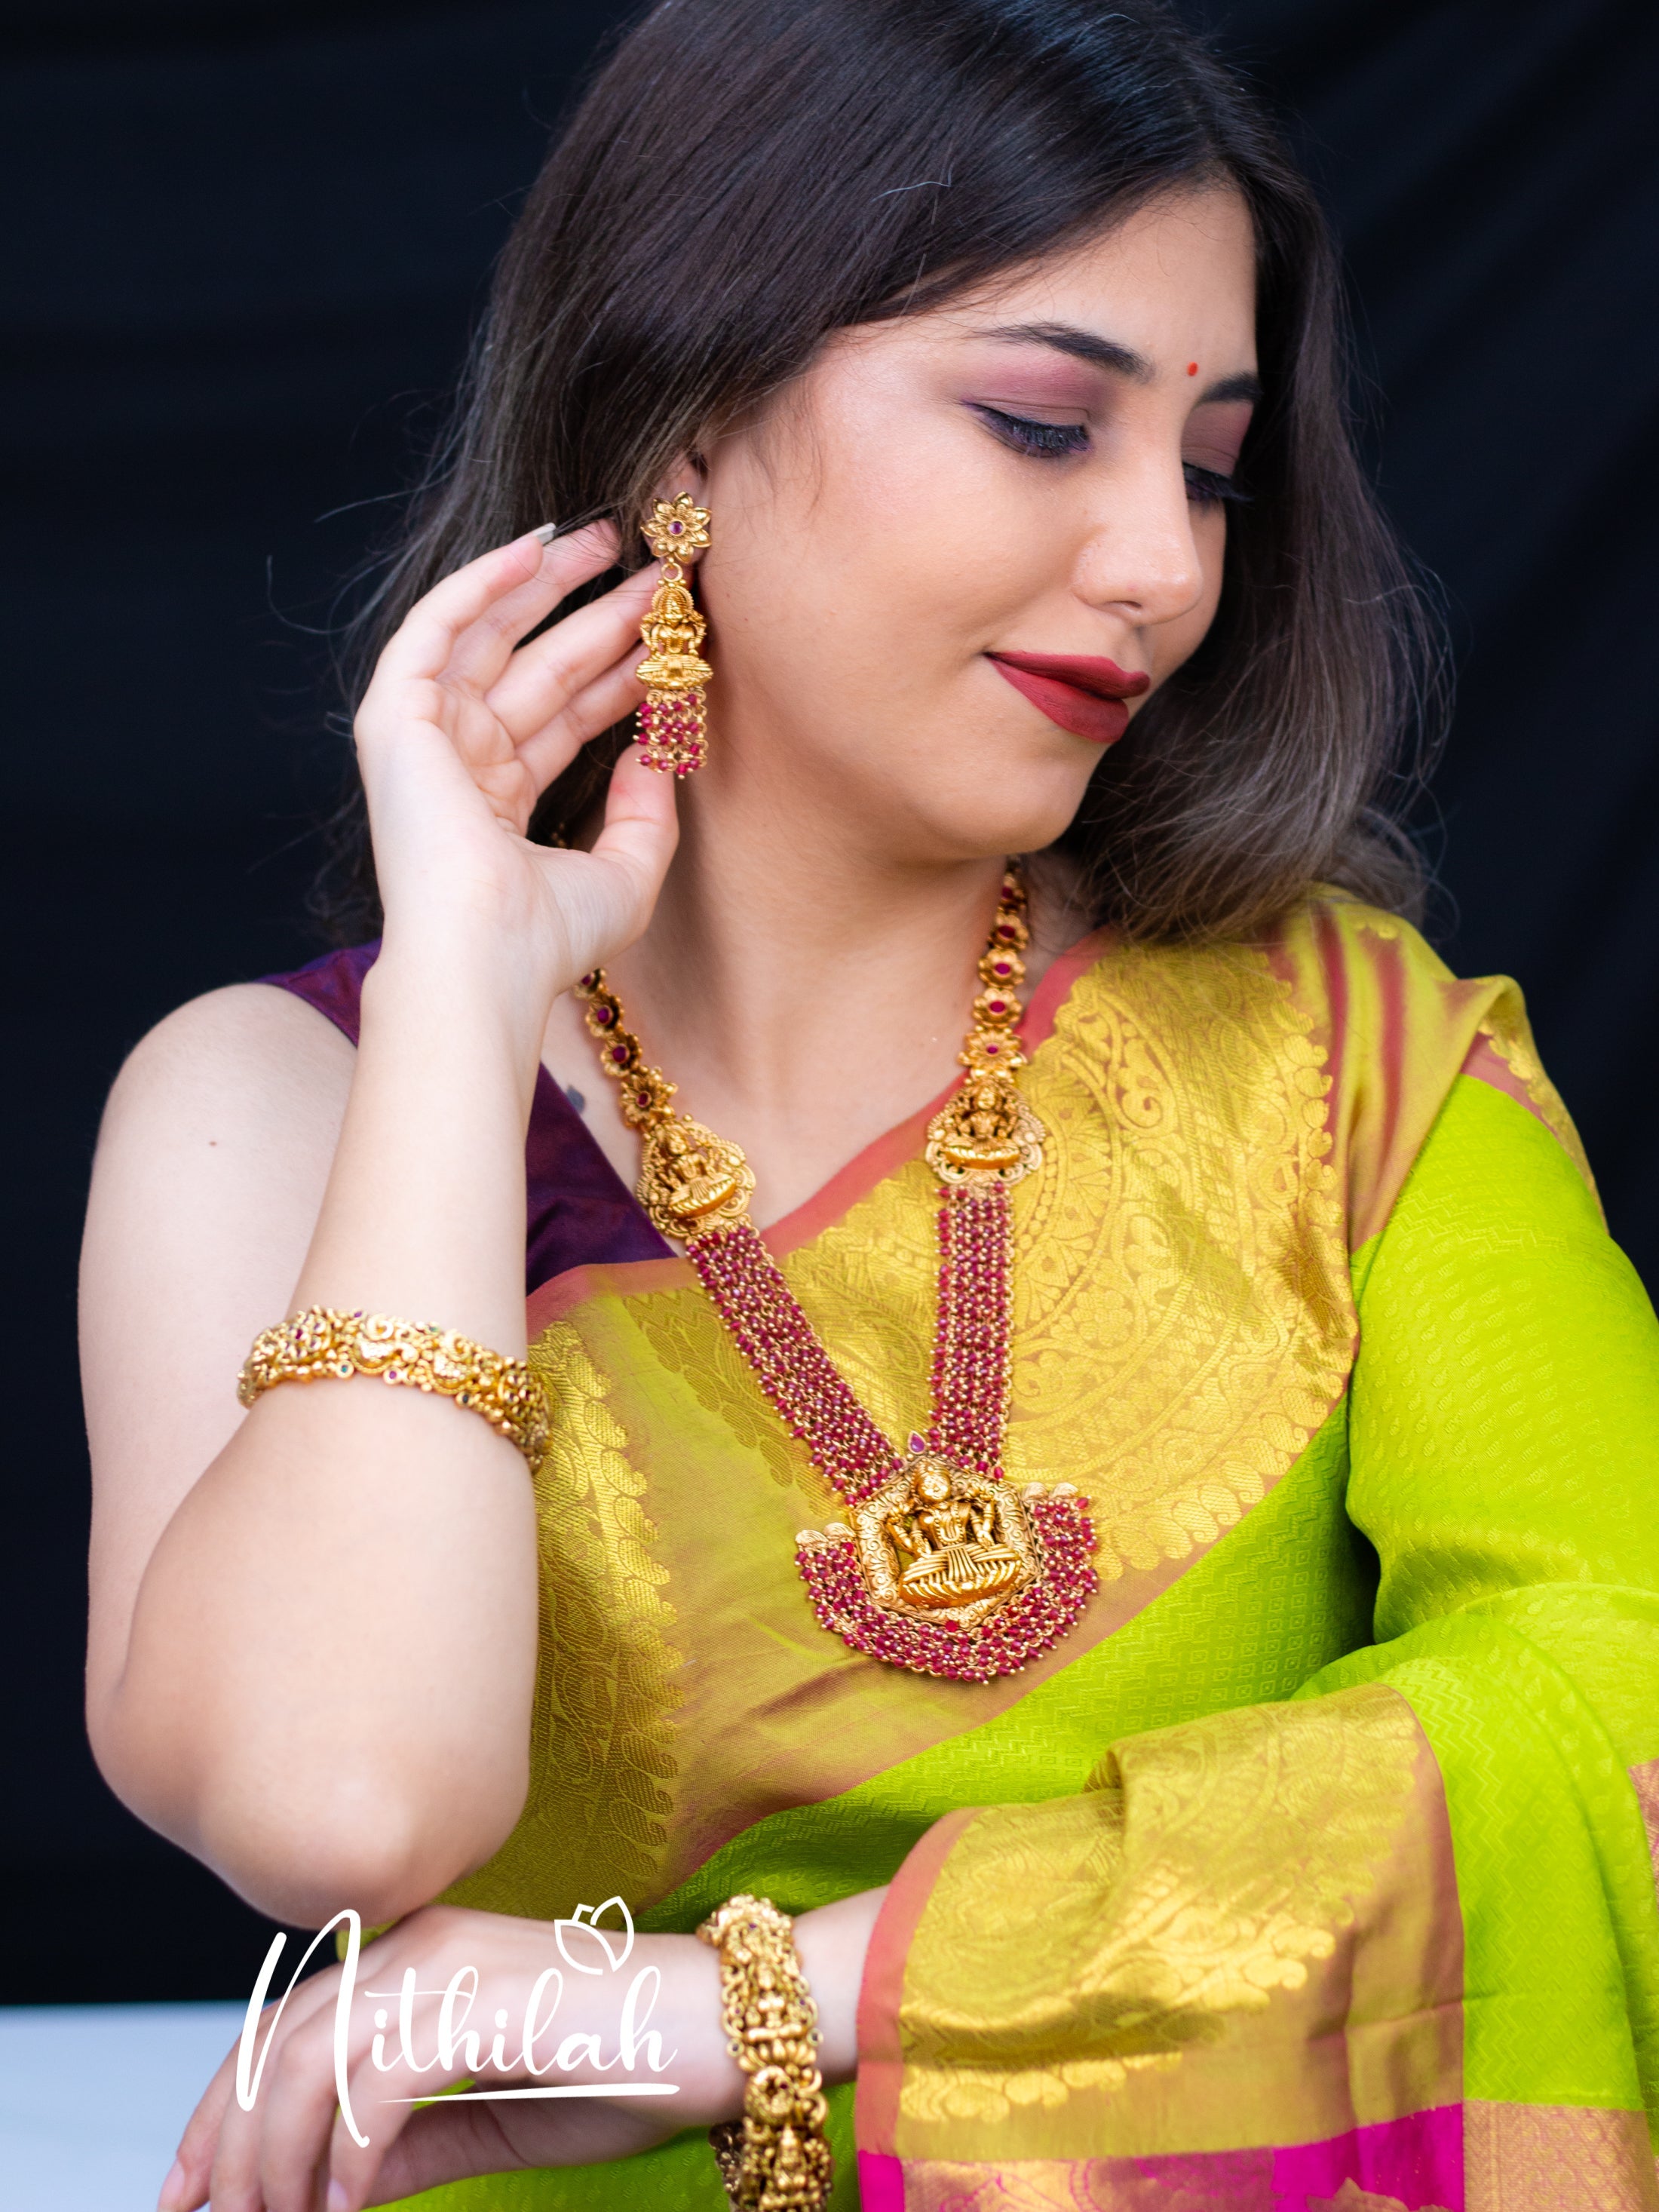 Nithilah Matching Jewelry for Your Onam Kerala Saree Outfit